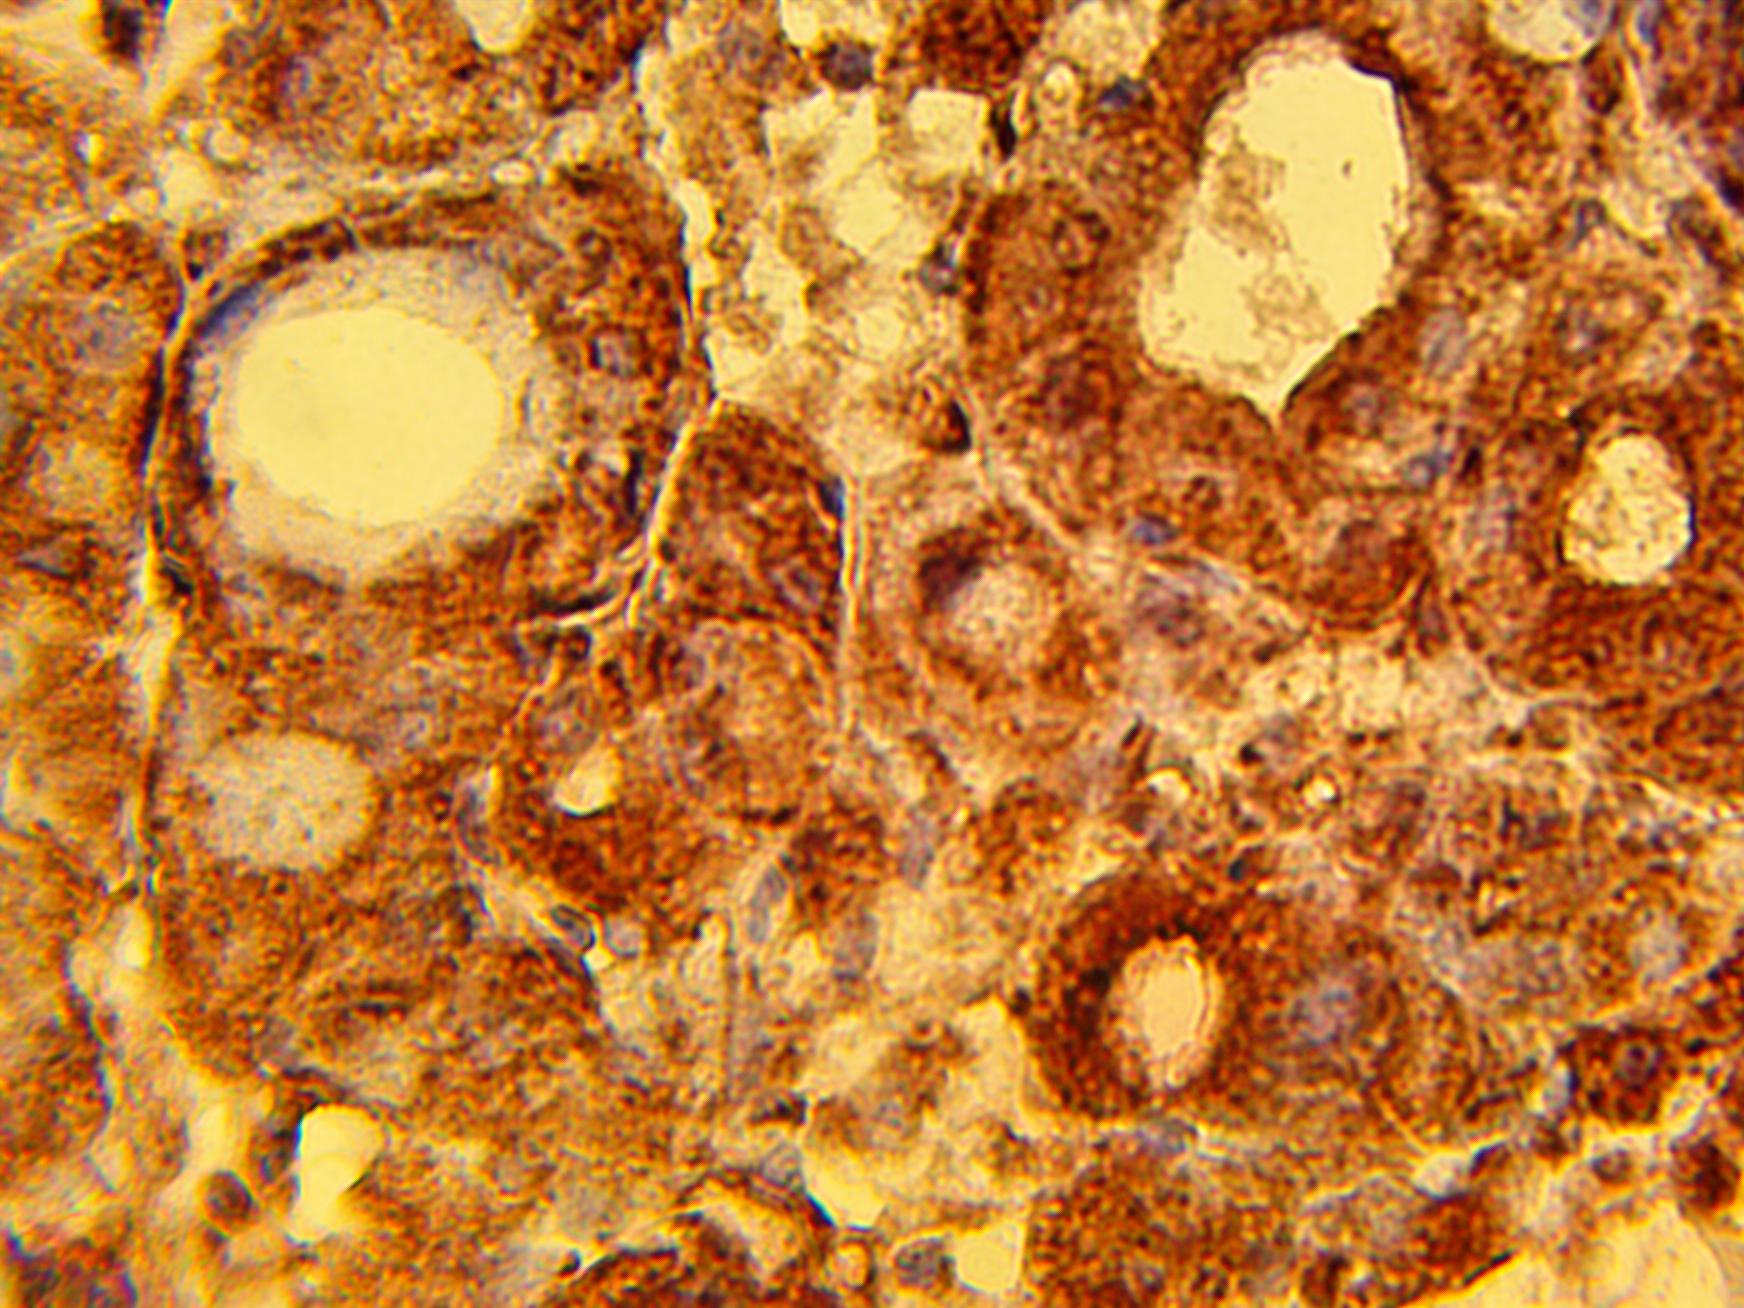 Immunohistochemical staining of human liver tissue diagnosed with hepatocellular carcinoma using RRM1 antibody (Cat. No. X2735P) at 15 µg/ml and detected using anti-Rabbit HRP secondary antibody and visualized using DAB substrate and hematoxylin counterstain.